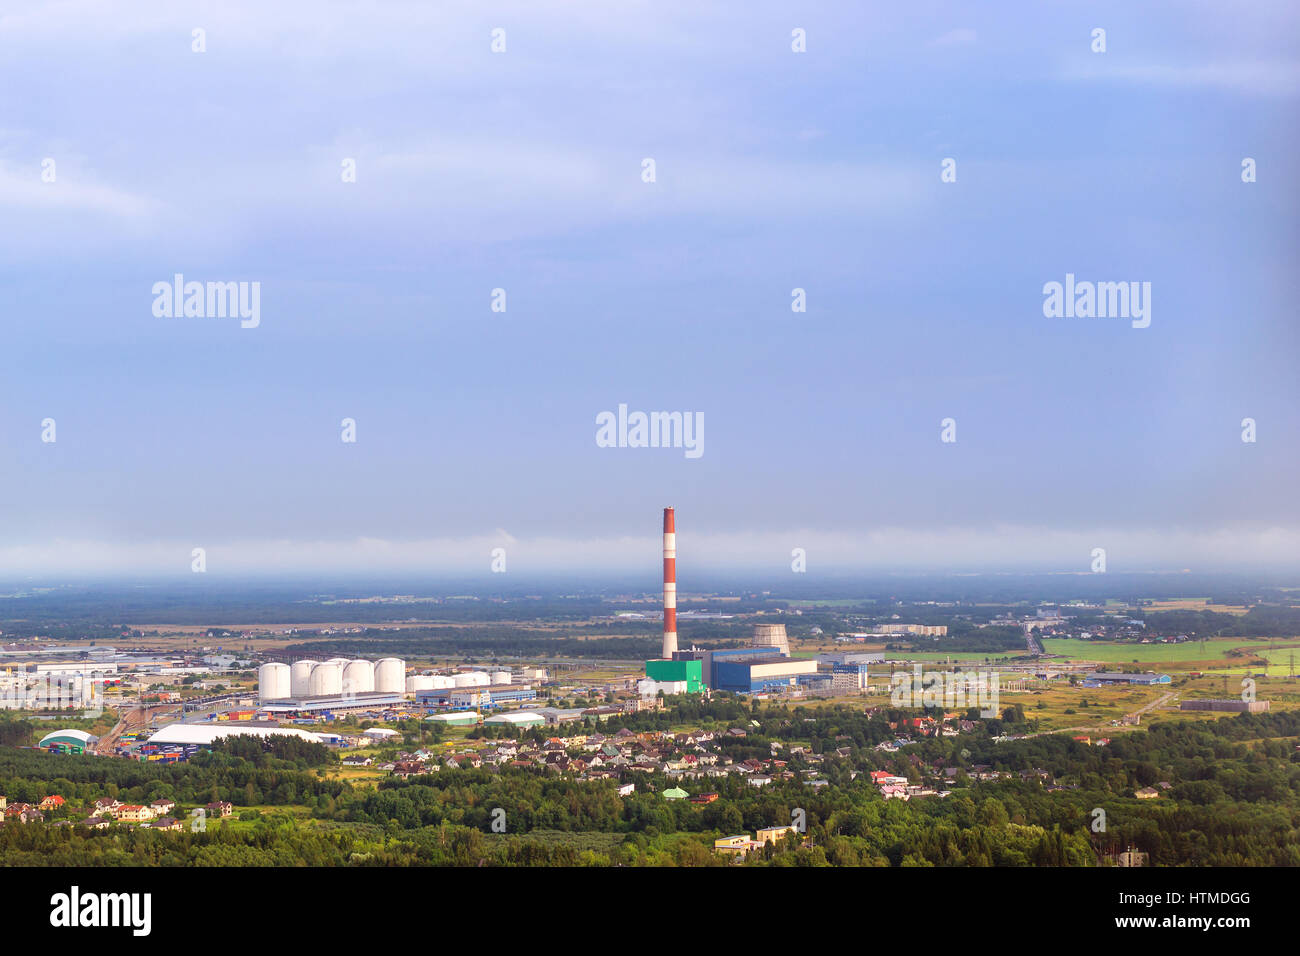 View from heights of Tallinn TV tower on Iru power plant, Eesti Energia. Types and horizons of Baltic cities with altitude. Cloudy overcast sky and ha Stock Photo